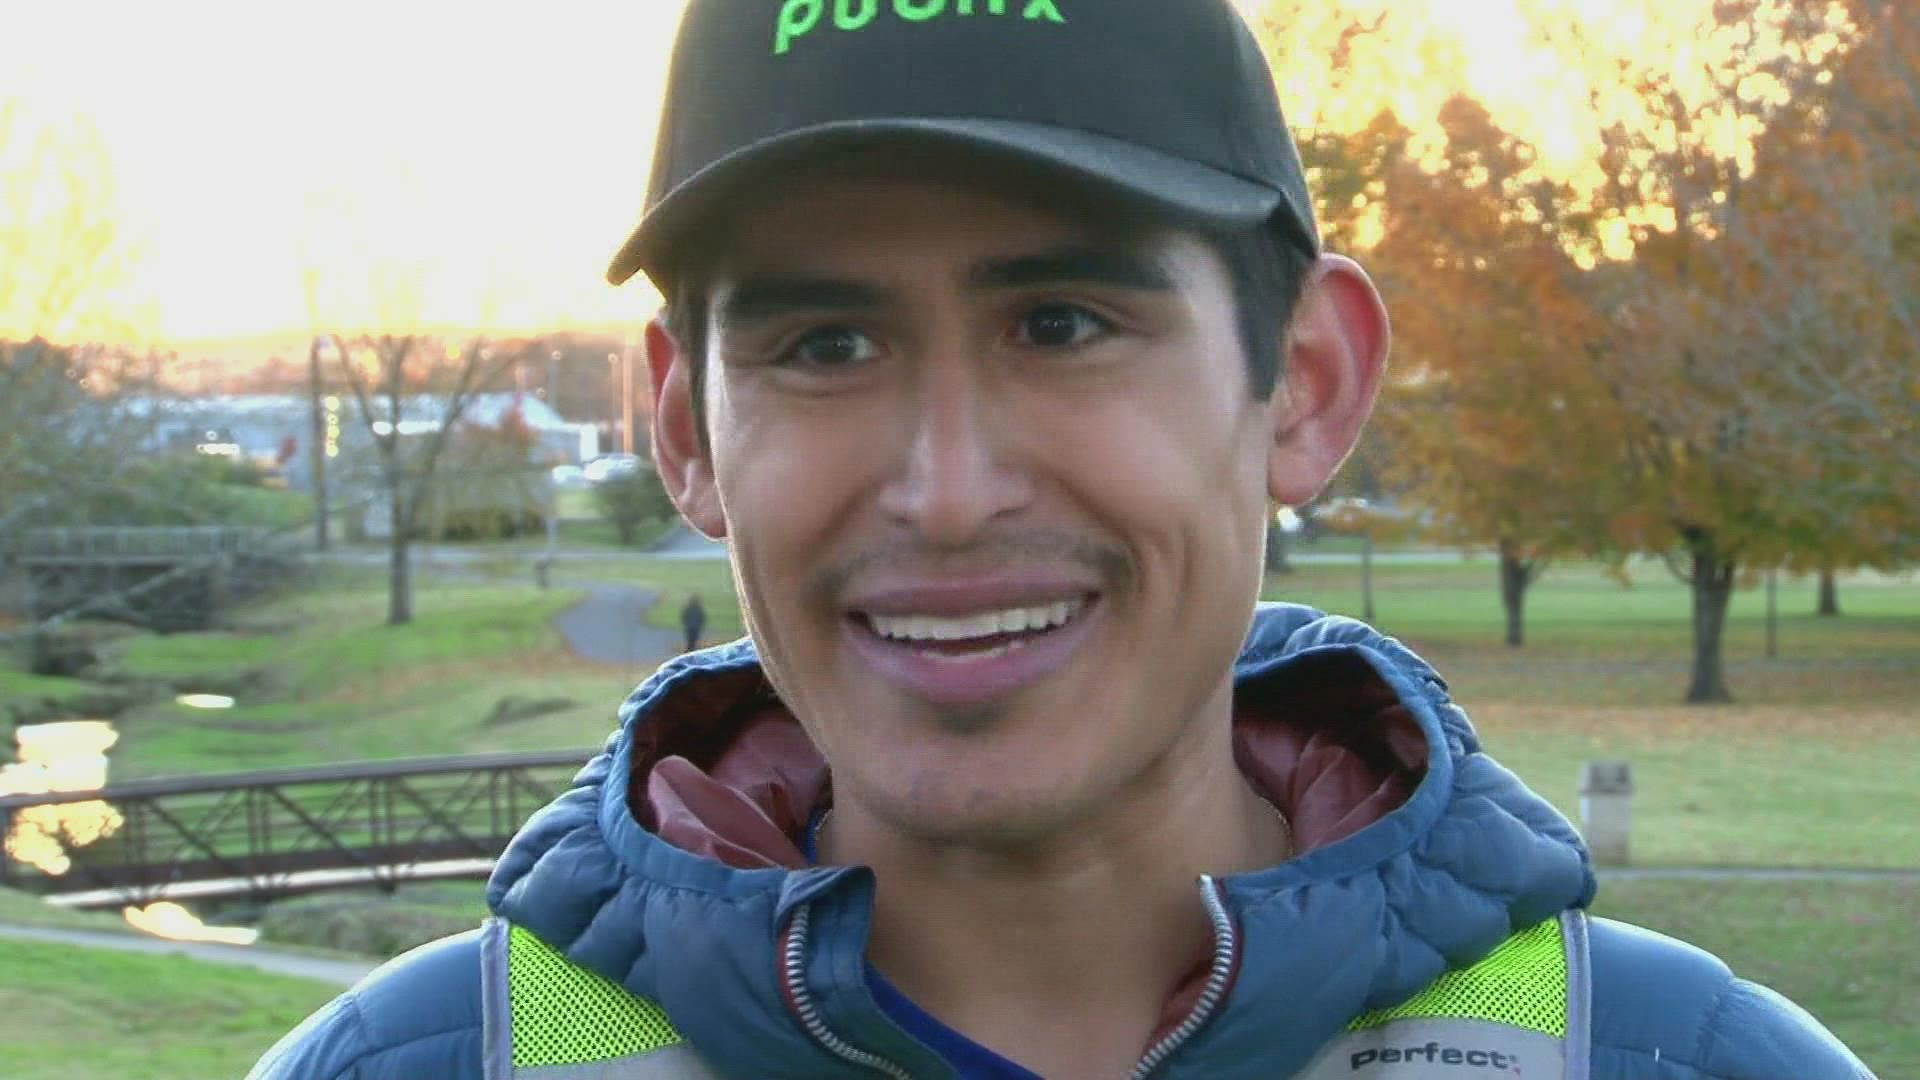 Hugo Garcia is running 642 miles, from Nashville to North Carolina. He doesn't call himself a marathon runner and says the secret is to just keep running.